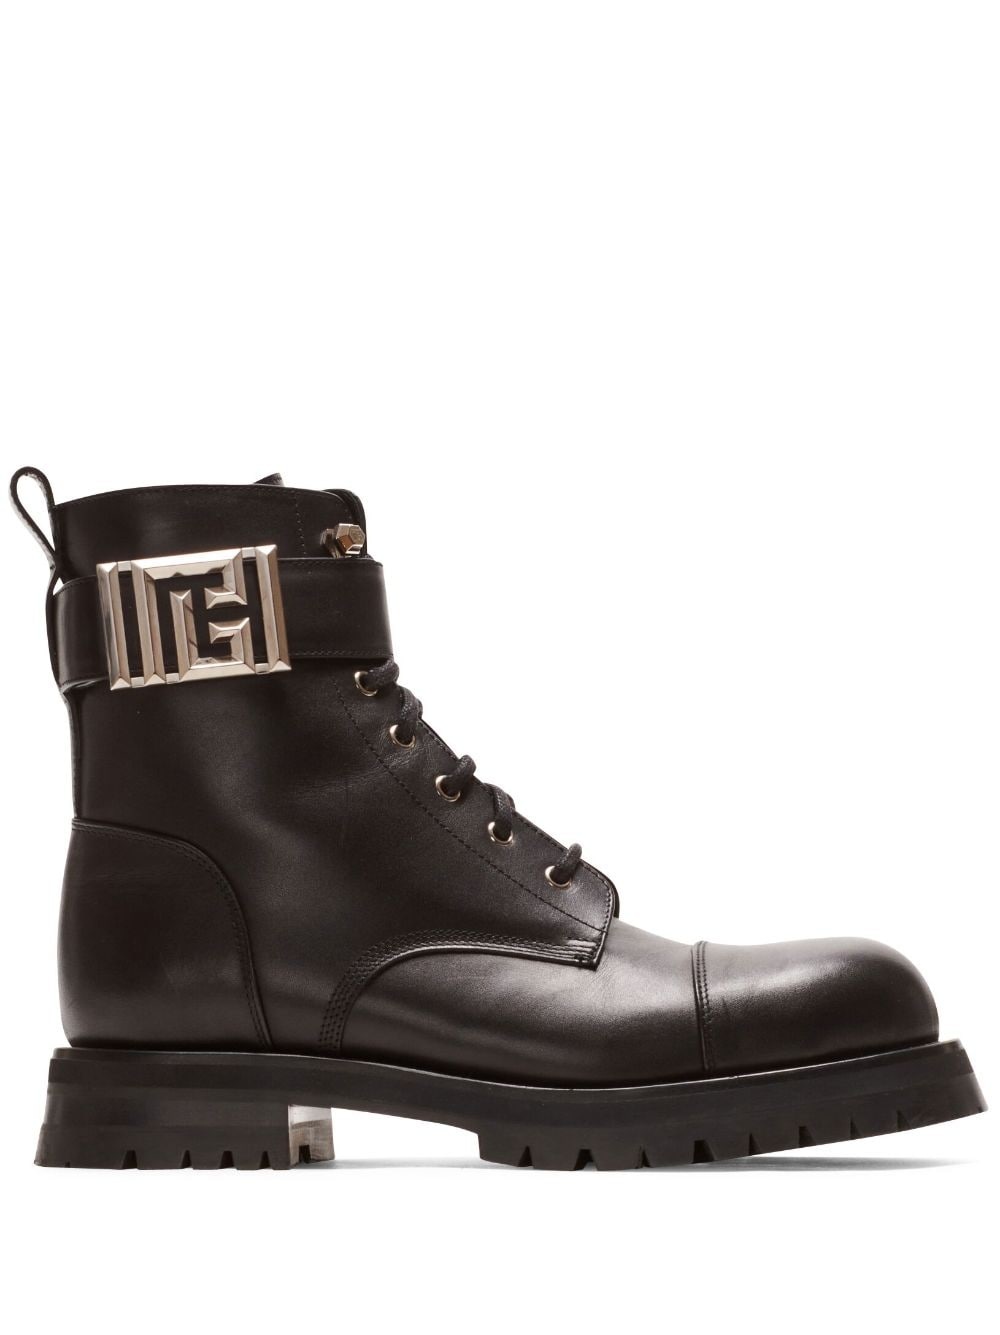 Charlie leather combat boots - 1